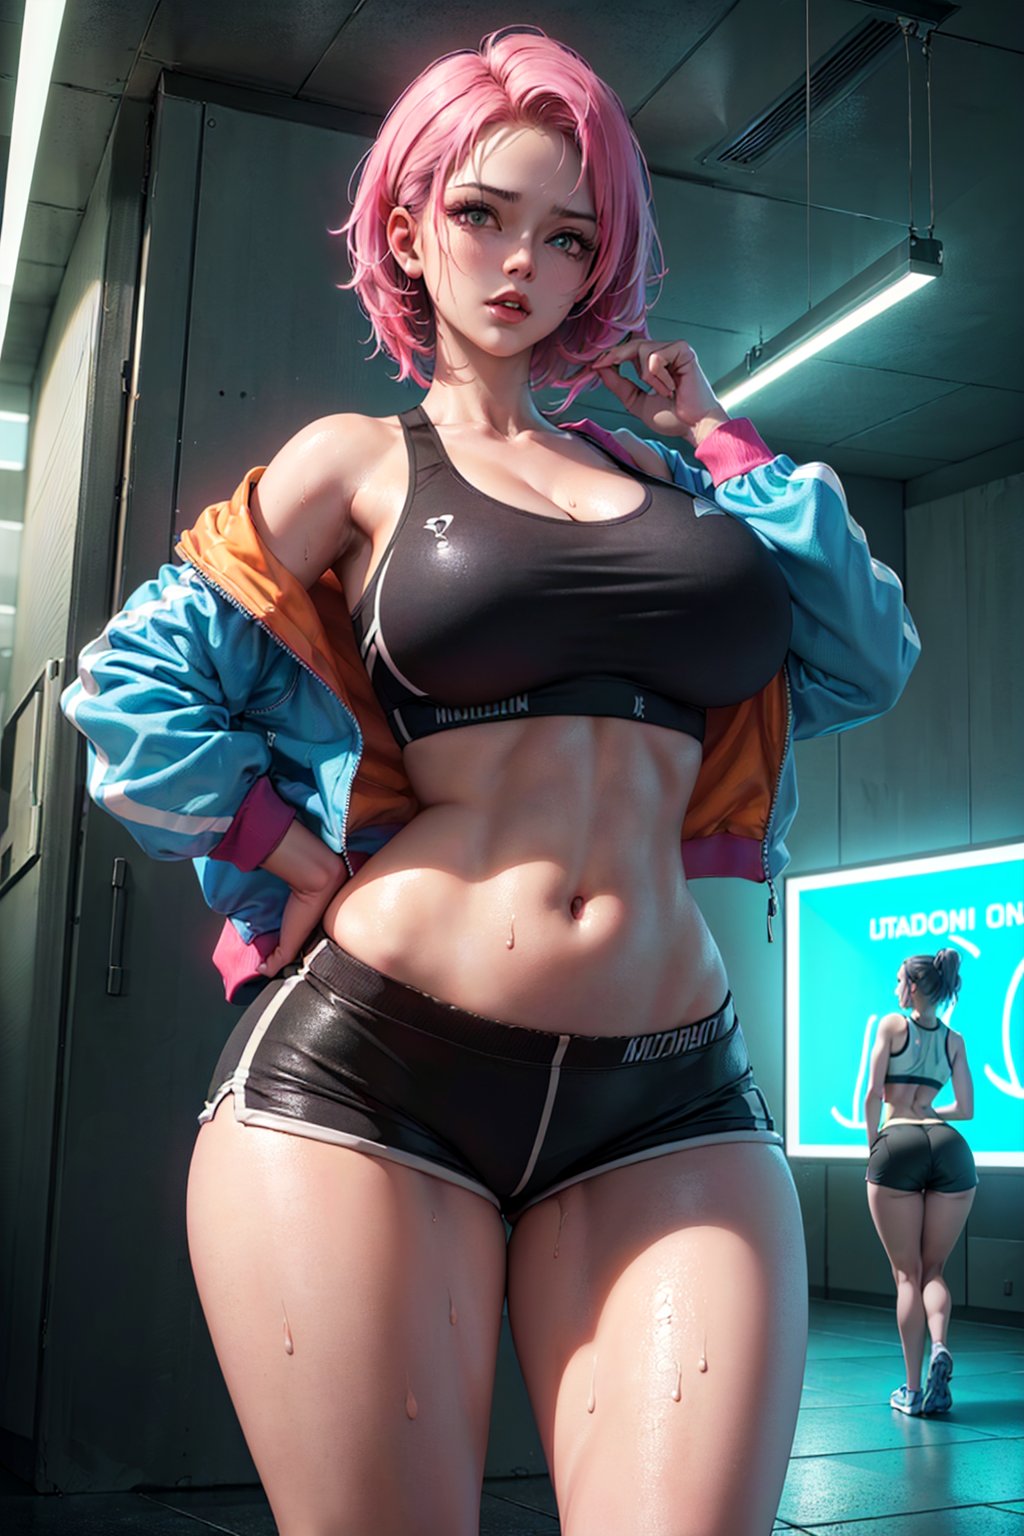 (1girl), ((sports bra, crop jacket, short shorts:1.3)), ((massive Breasts, breasts overflow, rounded breasts:1.3)), ((bimbo breast, torpedo breast:1.1)), ((accentuated breast, large pelvic, wide hip, midriff, narrow waist, curvy waist, fit:1.2)), ((slim, skinny waist:1.3)), modern hairstyle, colour streaked hair, highlights, ((sweaty)), ((sexy poses:1.3)), ((wide hips, groin)), ((huge pelvic)),masterpiece, best quality, realistic, ultra highres, depth of field, (full dual colour neon lighting:1.2), (hard dual colour lighting:1.4), (detailed face:1.2), (detailed eyes:1.2), (detailed background), (masterpiece:1.2), (ultra detailed), (best quality), intricate, comprehensive cinematic, magical photography, (gradients), colorful, detailed landscape, visual key, shiny skin,